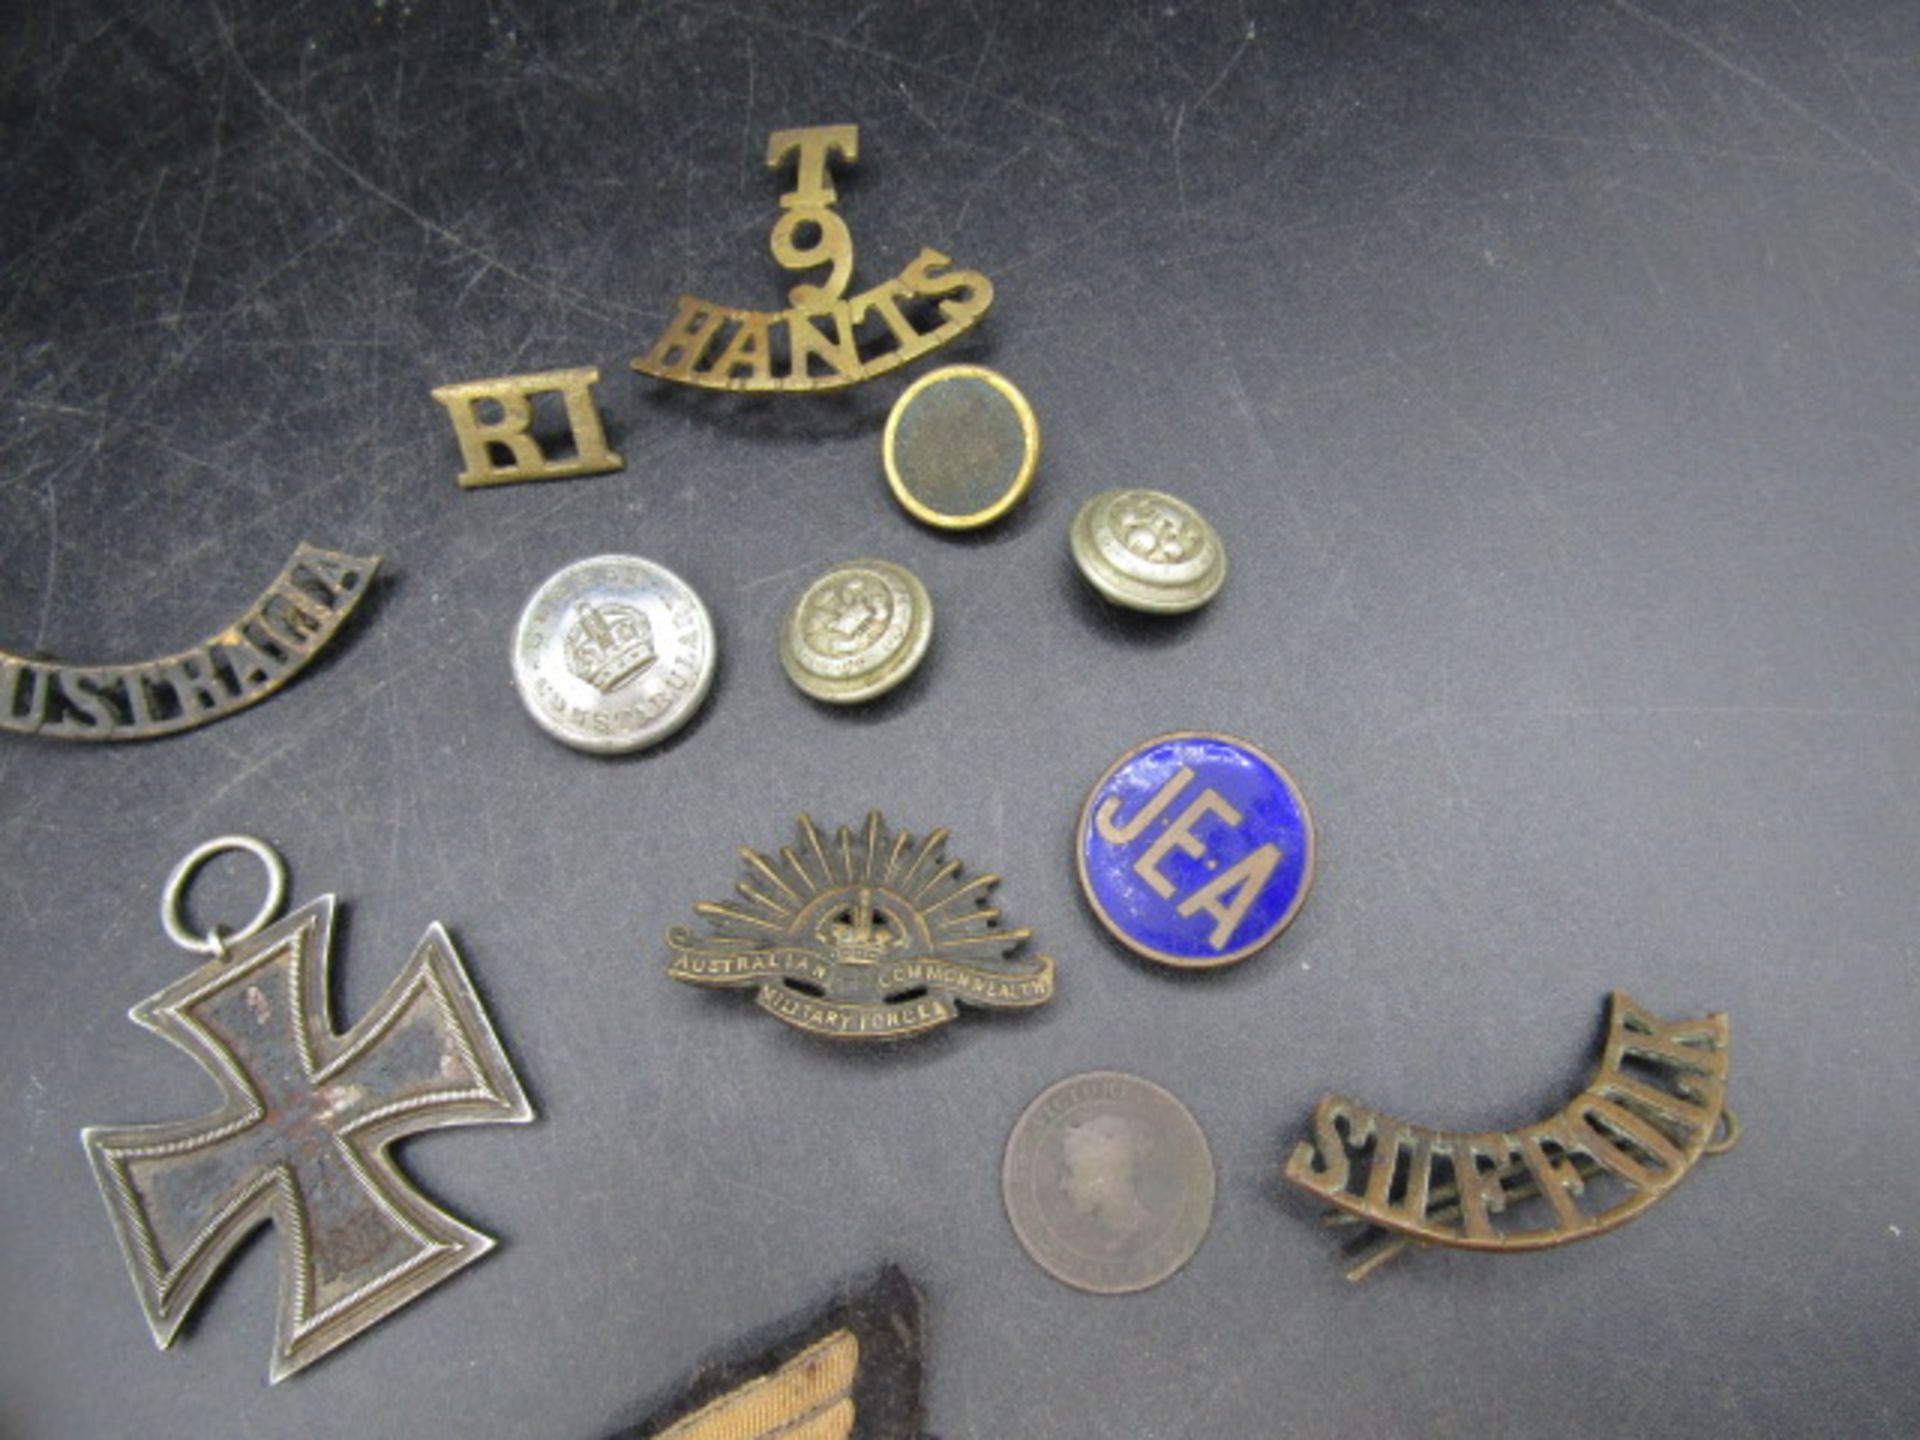 WW2 iron cross and various insignia badges and patches plus a charm bracelet - Image 4 of 9